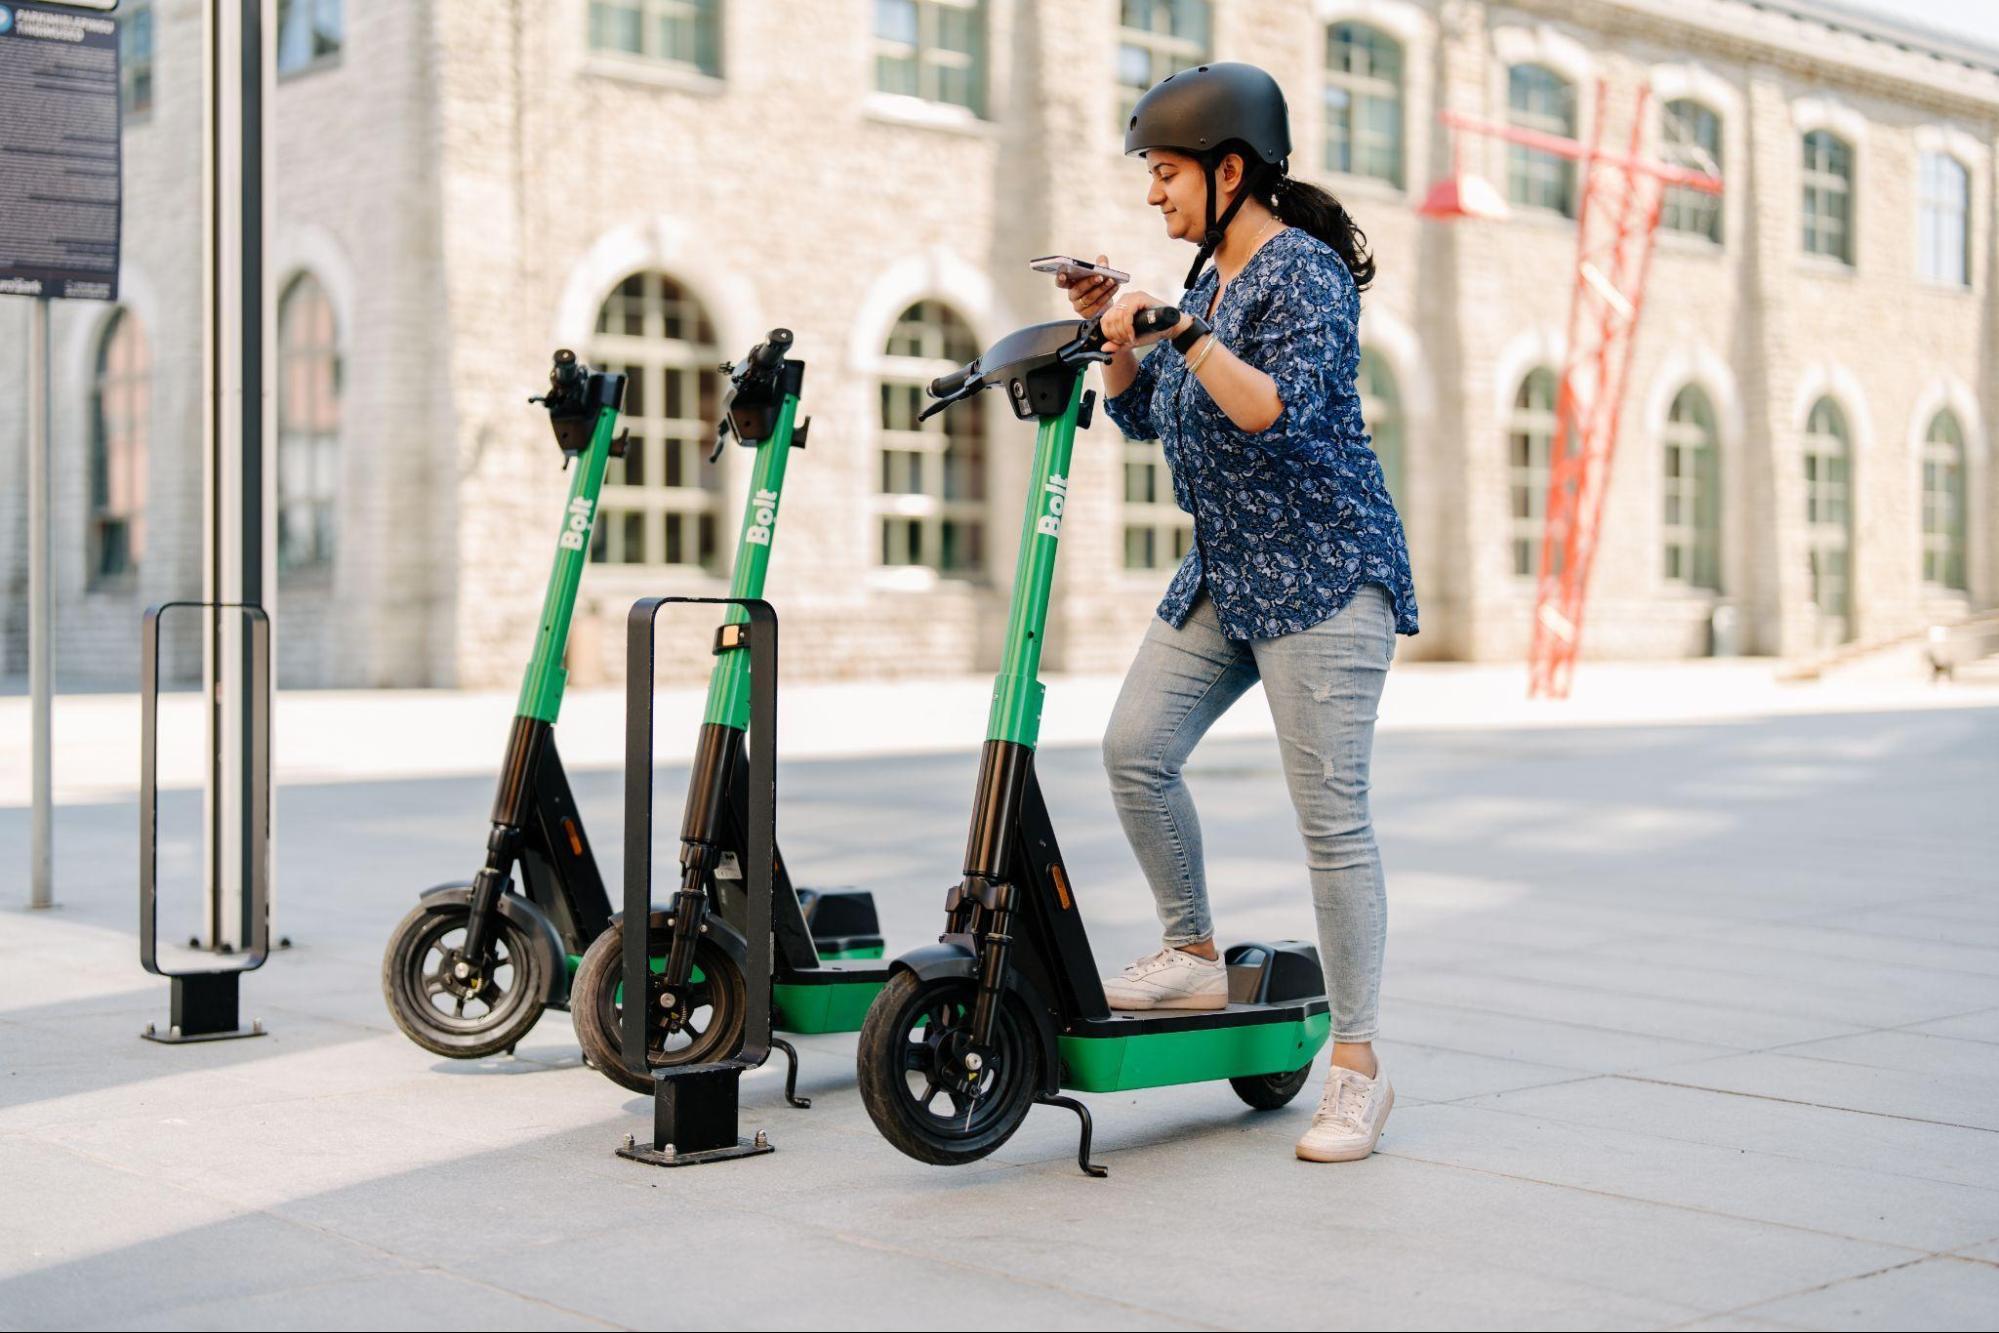 Bolt offers safe and convenient shared scooters and e-bikes